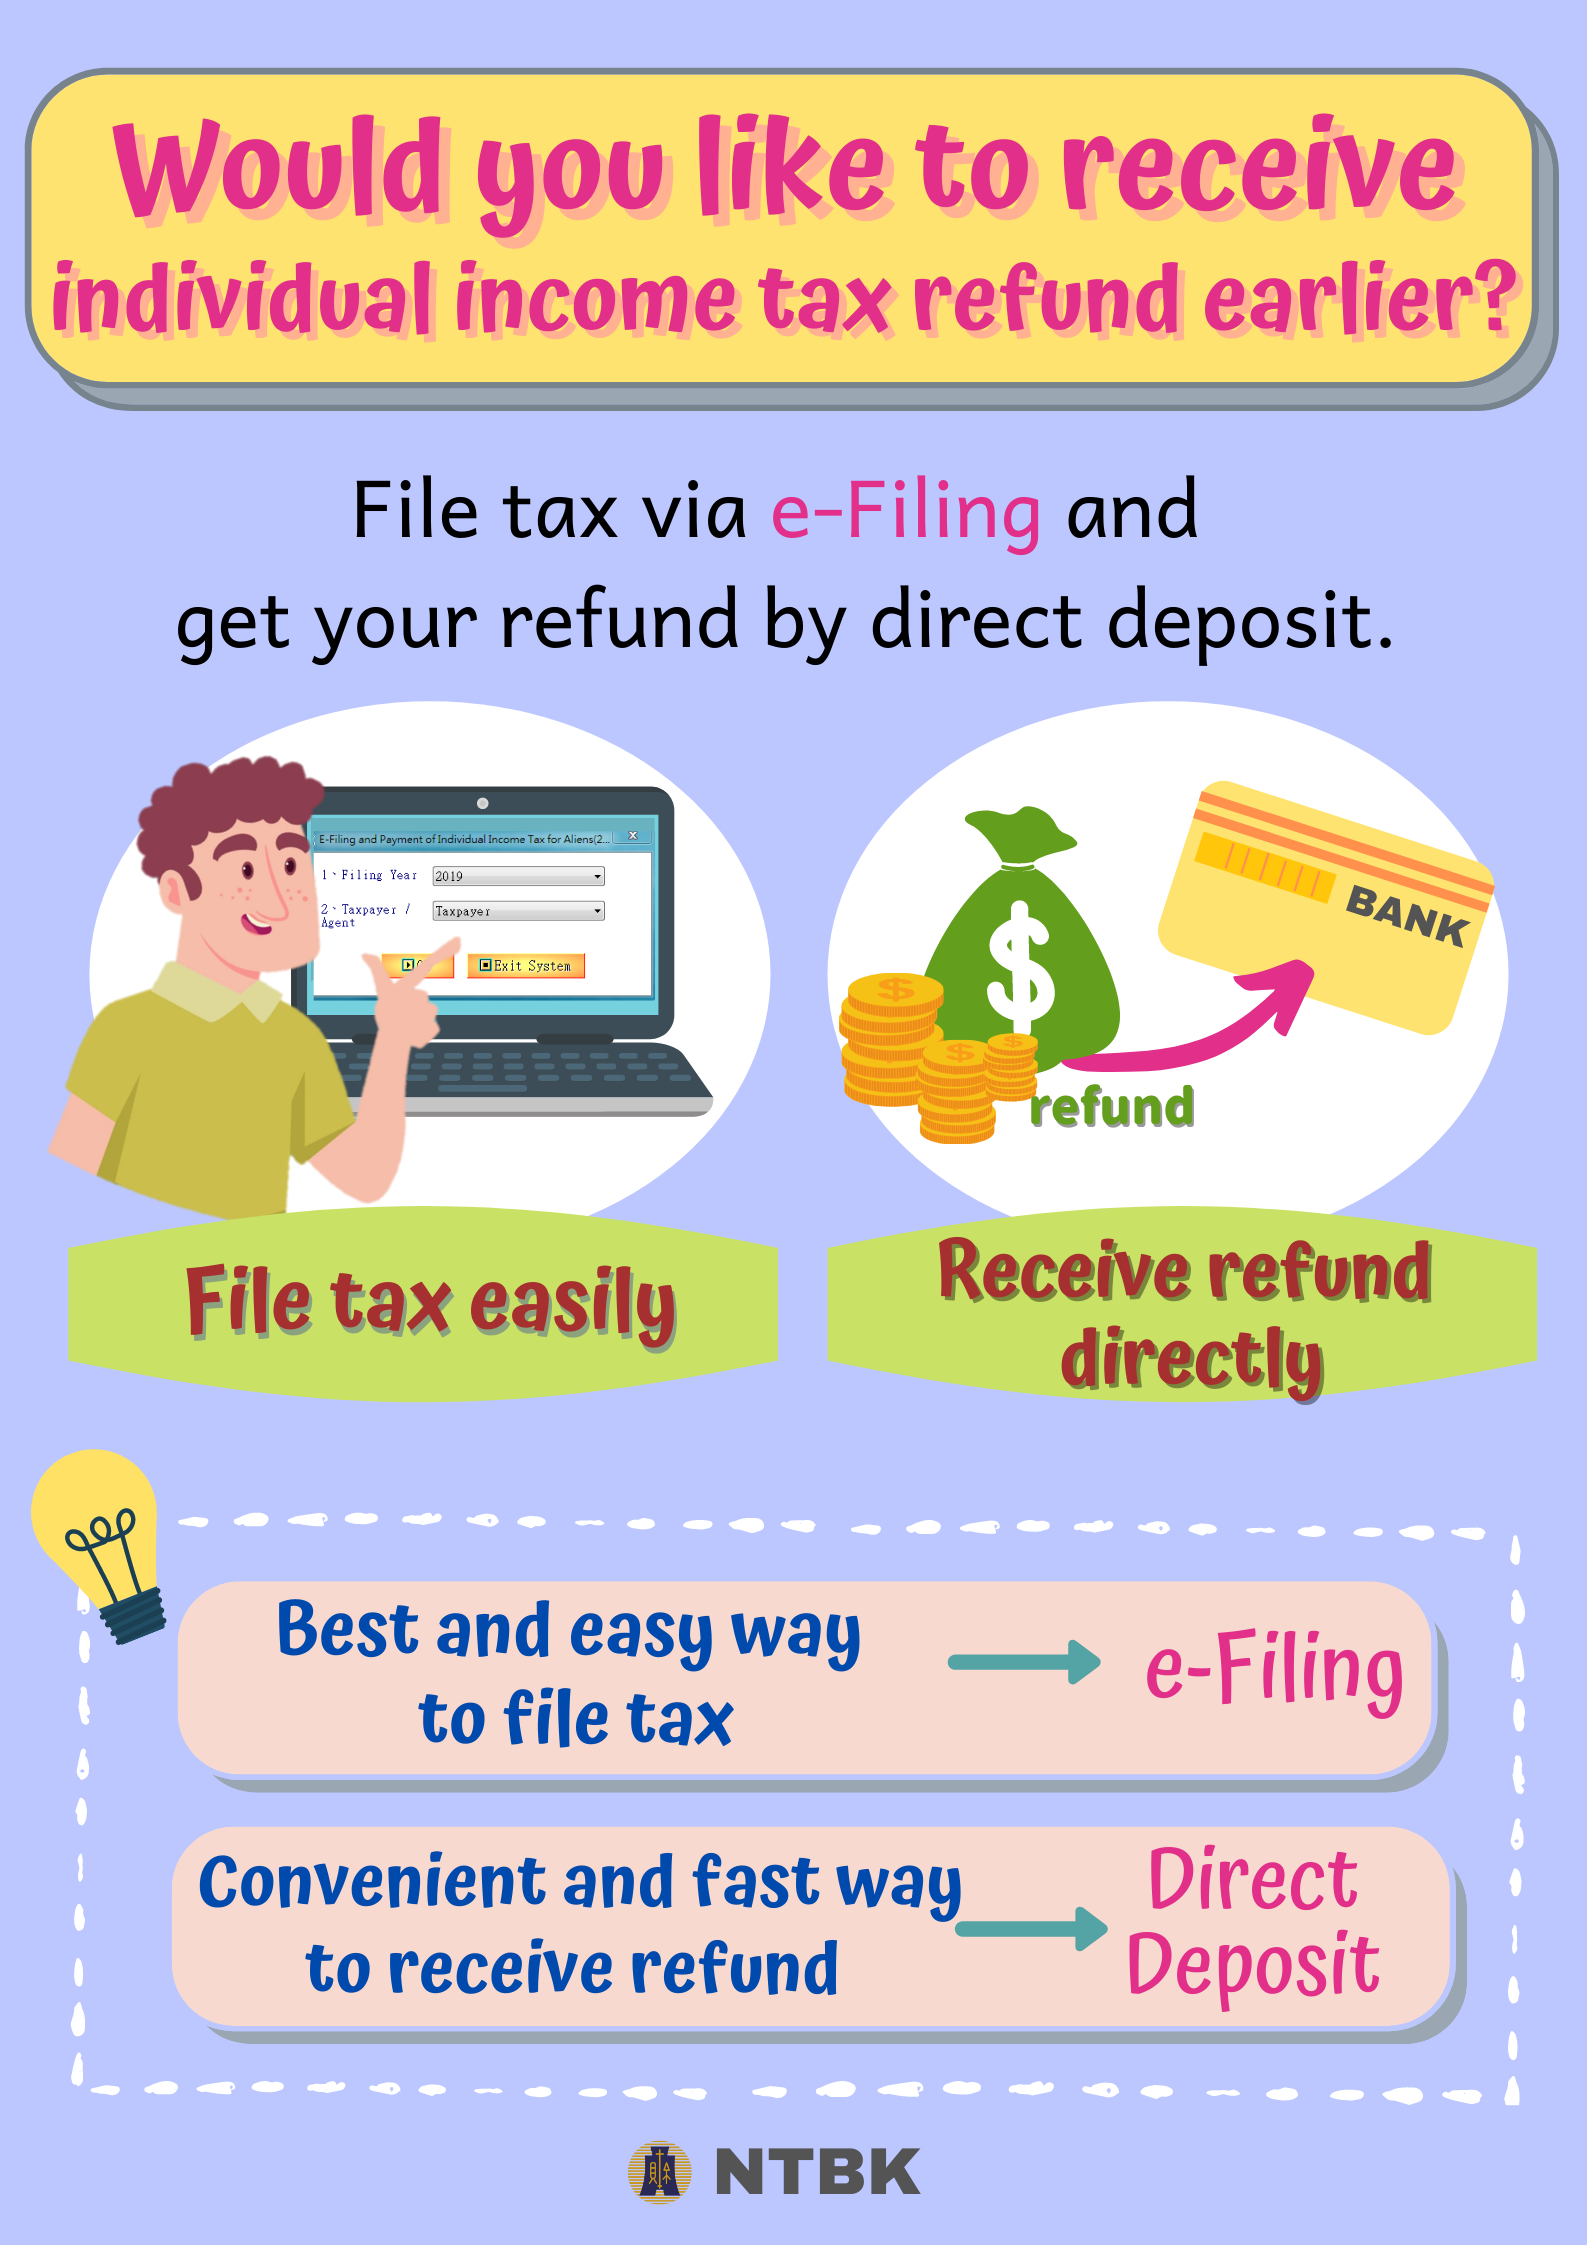 image of Would you like to receive individual income tax refund earlier?